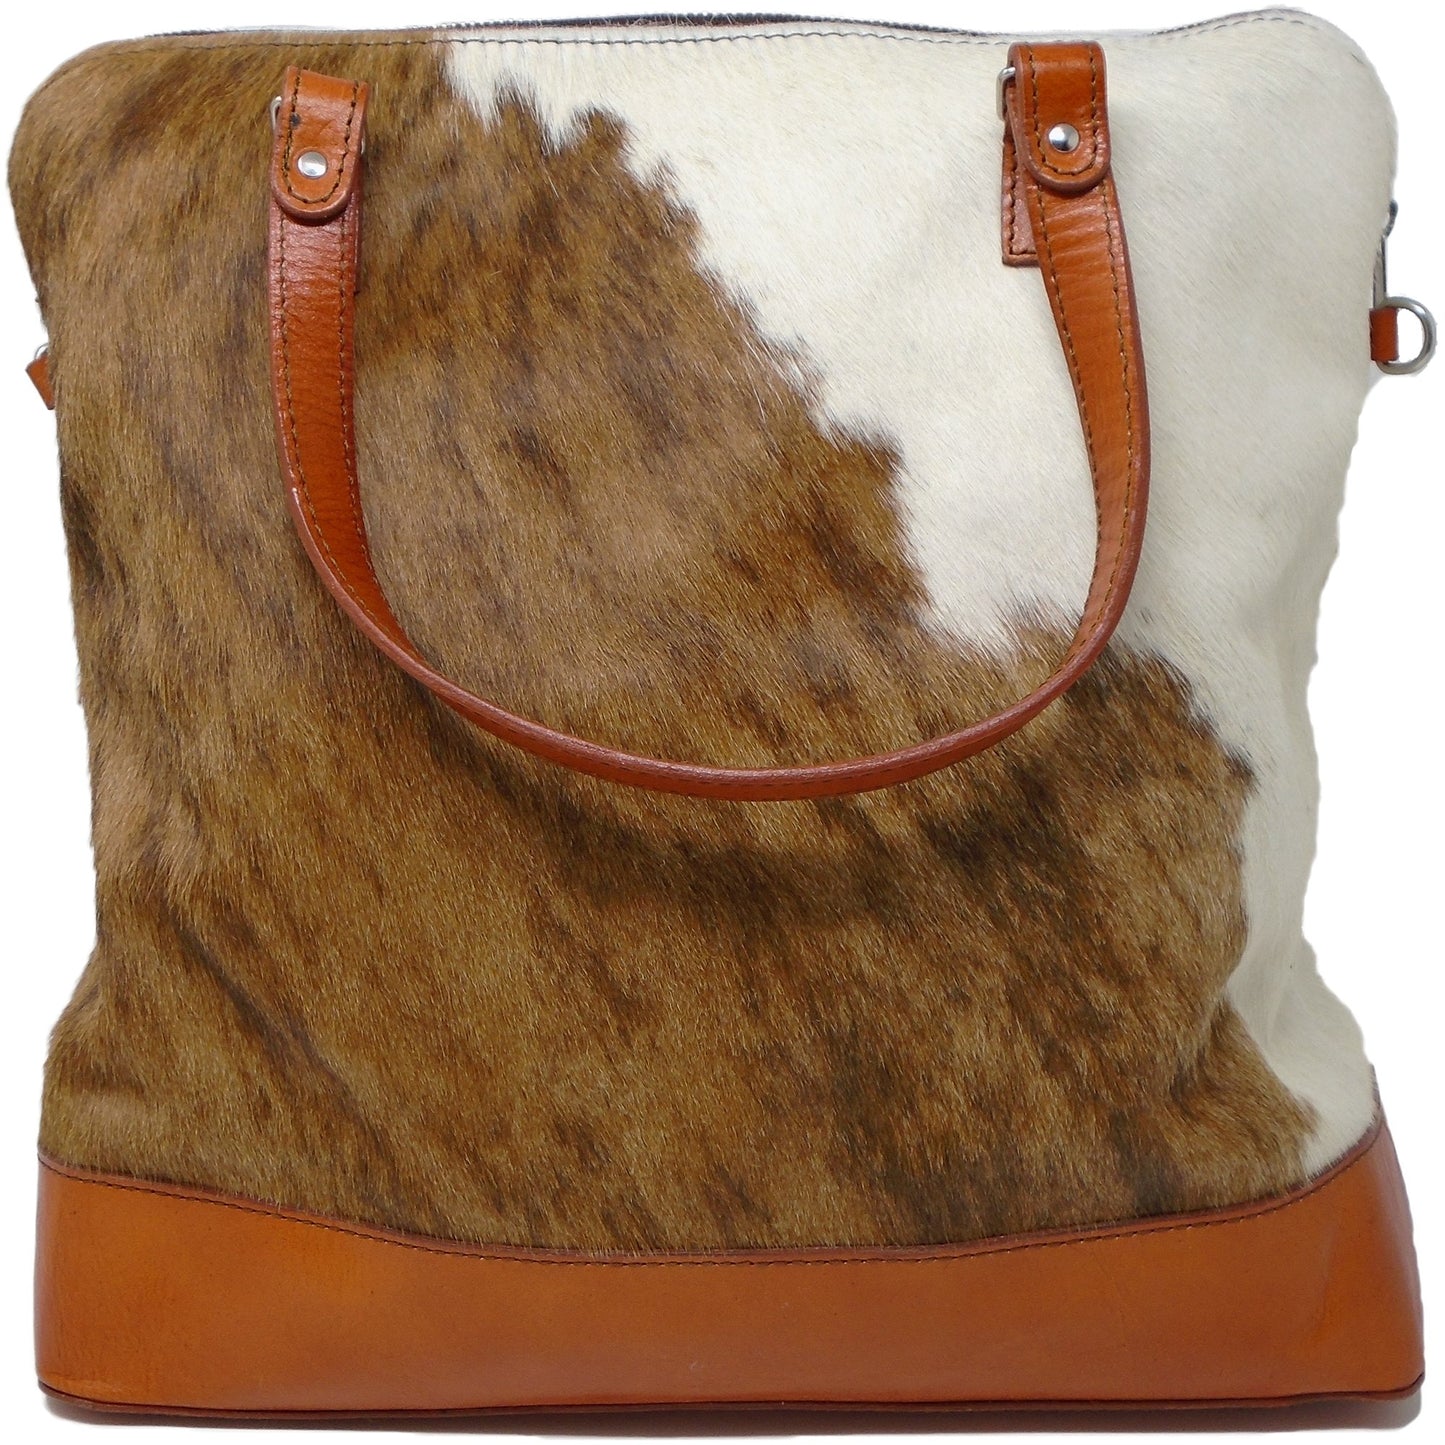 Cowhide & Leather Travel Bag - bag, cowgirl, hair, haironhide, haironhidebag, handbag, leather, made in the usa, madeintheusa, MADEINUSA, madeinusajewelry, Printed in USA, purse, southwestern, tote, travel, usa, usa artisan, usa artist, usa made, usaartisan, usaartist, USAMADE, usaratisan, usartisan, western -  - Baha Ranch Western Wear